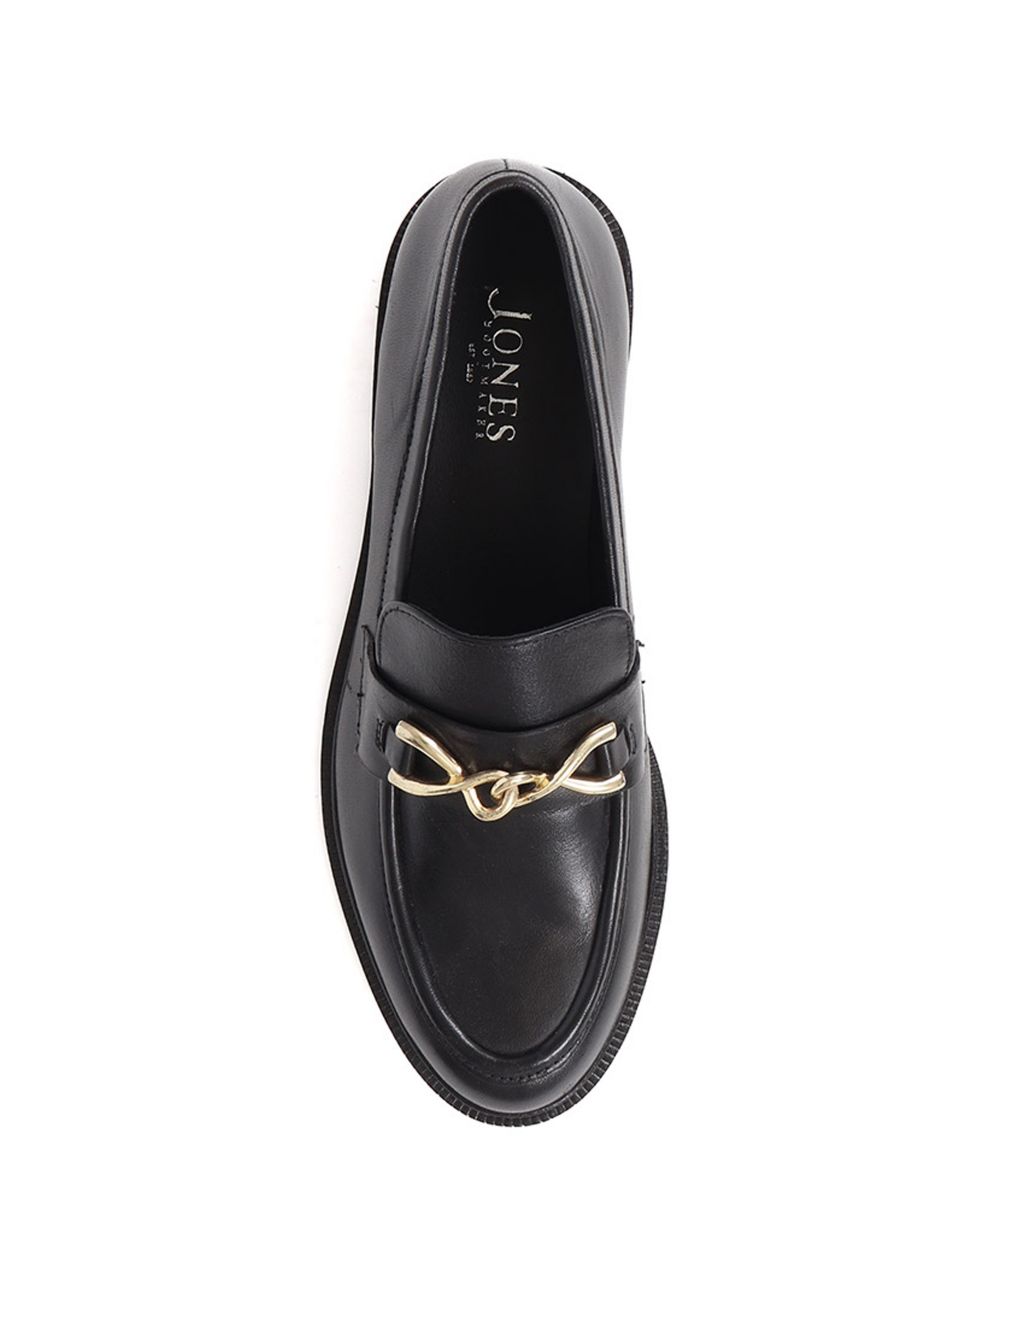 Leather Chain Detail Flat Loafers image 3